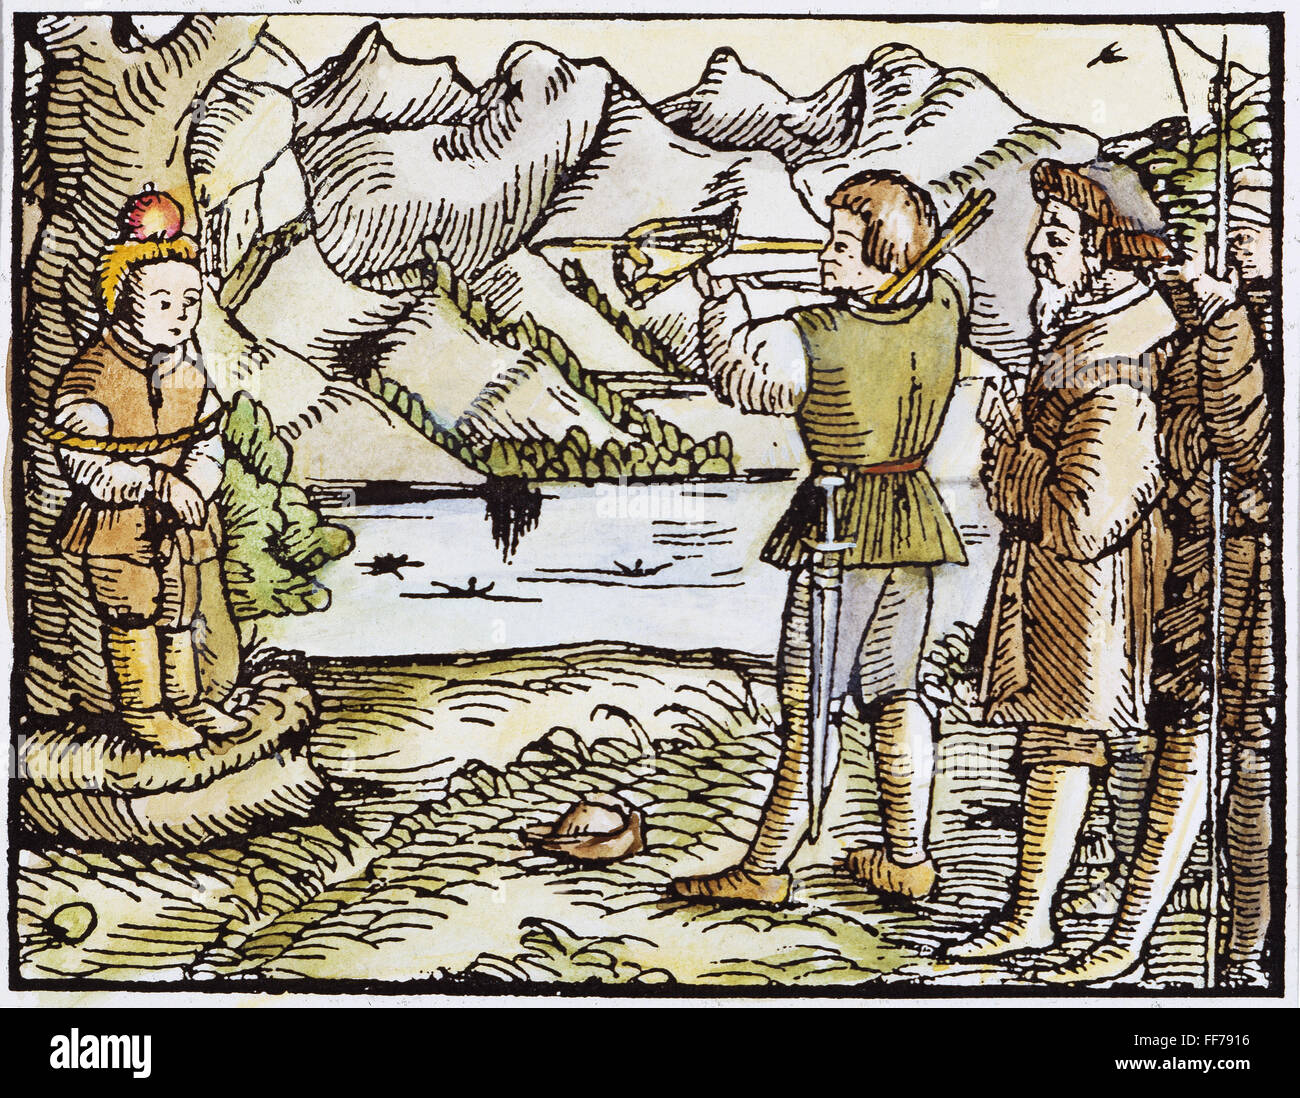 WILLIAM TELL. /nWilliam Tell and the apple-shoot. Woodcut from the printed edition of Jakob Ruff's version of the Canton of Uri folk play, Von dem frommen und ersten Eydgnossen Wilhelm Thellen, first acted by the townspeople of Zurich on New Year's Day, 1 Stock Photo